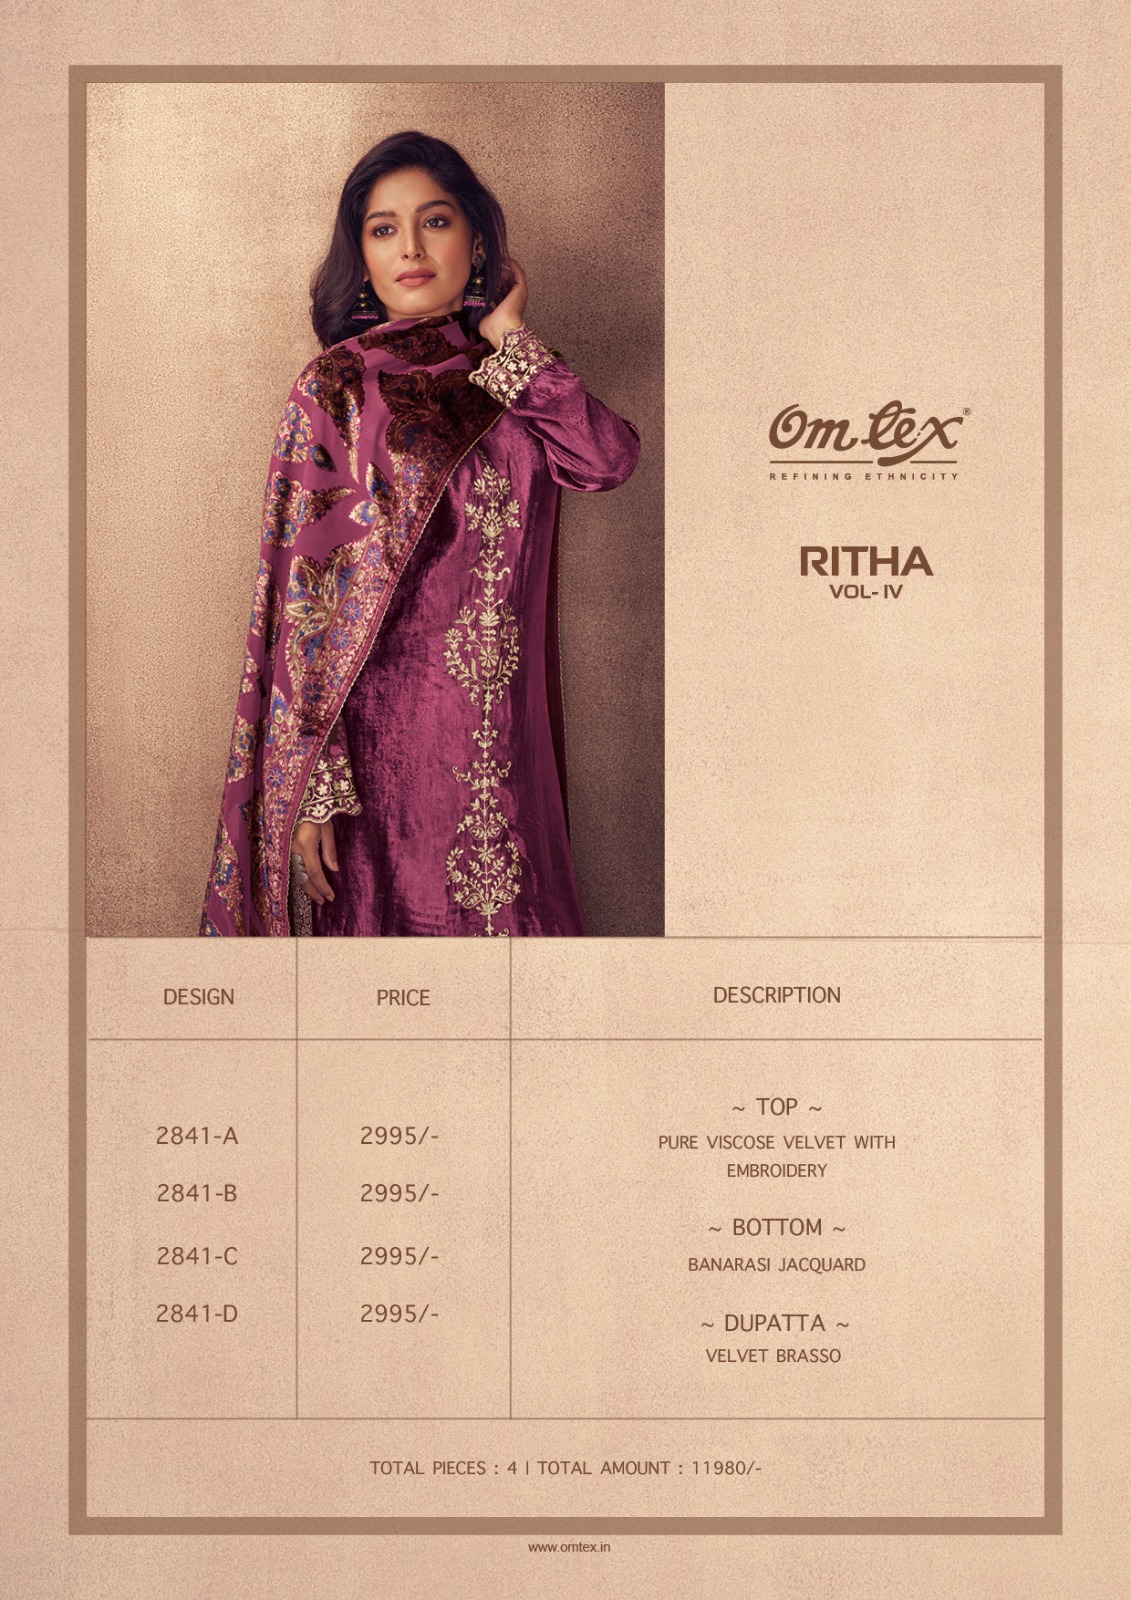 Omtex Ritha Vol 4 collection 6